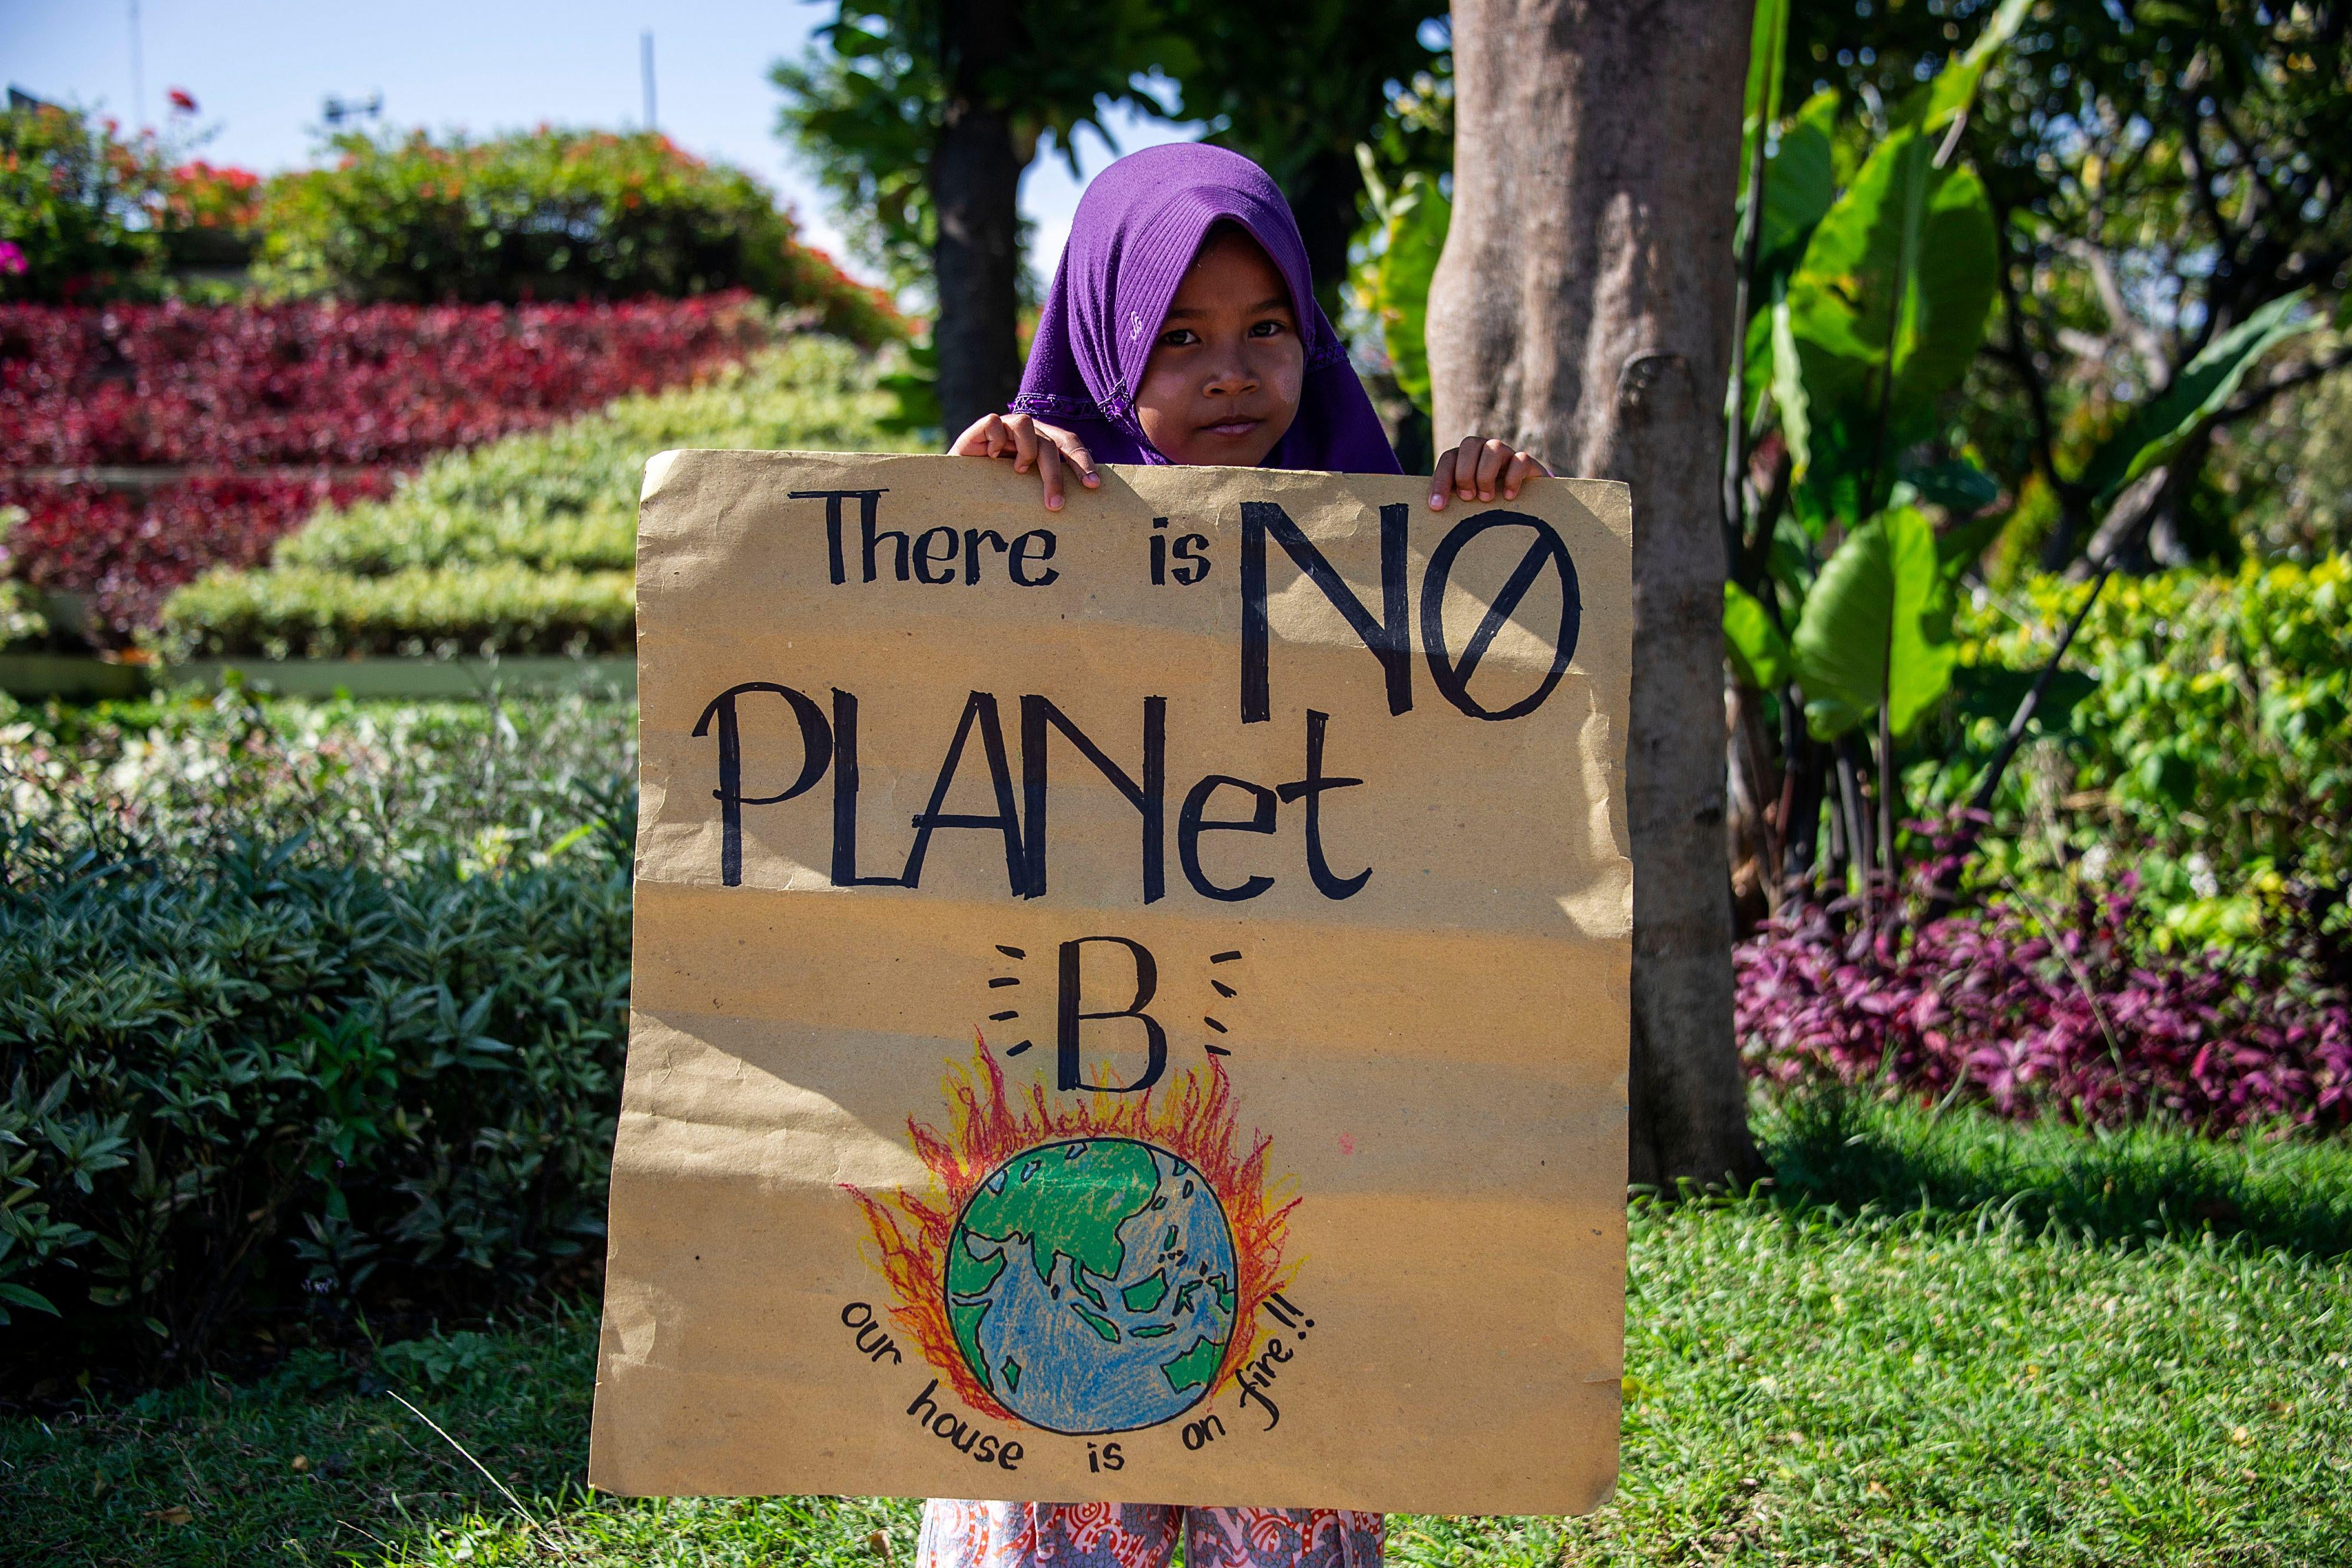 An Indonesian child holds a placard that says "there is no planet b."